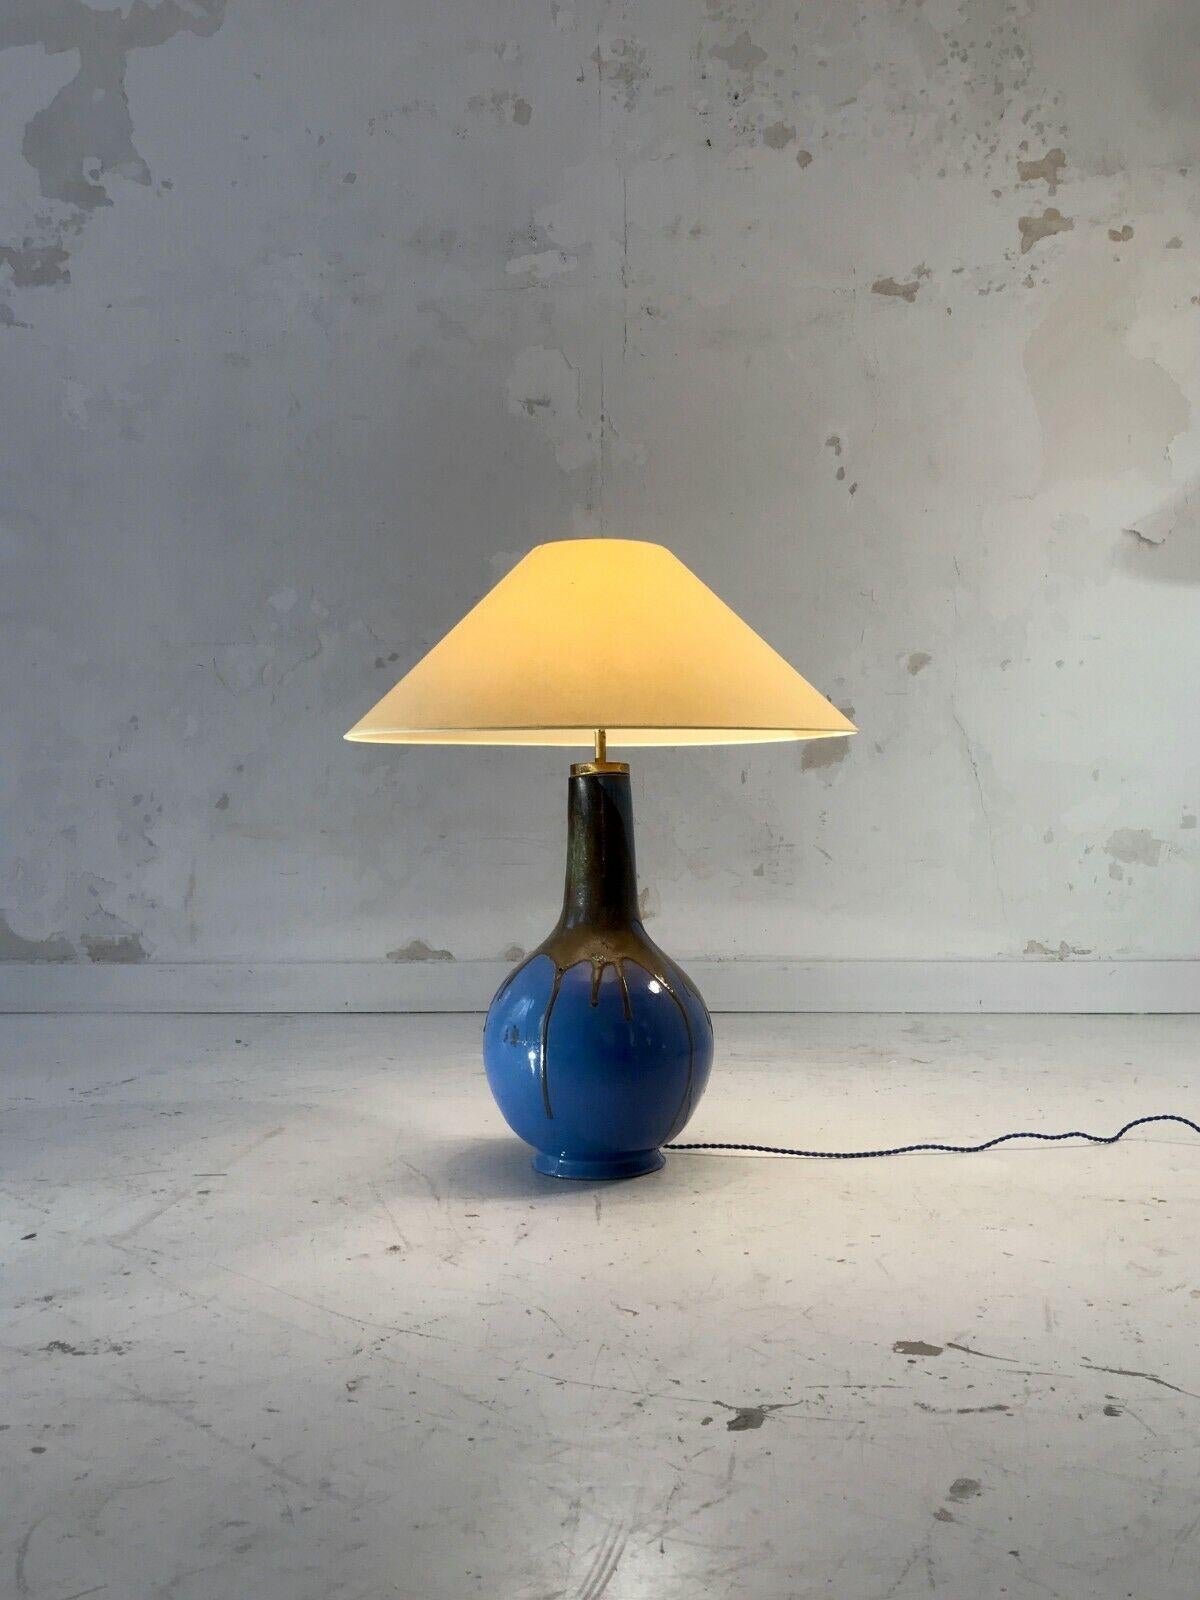 A very large table or floor lamp, Pop, Seventies, Free Form, in thick blue enameled ceramic with black drips, illegible signature, to be attributed, France 1960-1970.

DIMENSIONS:
Dimensions with blue lampshade in photo: 80 x 50 cm
Dimensions of the